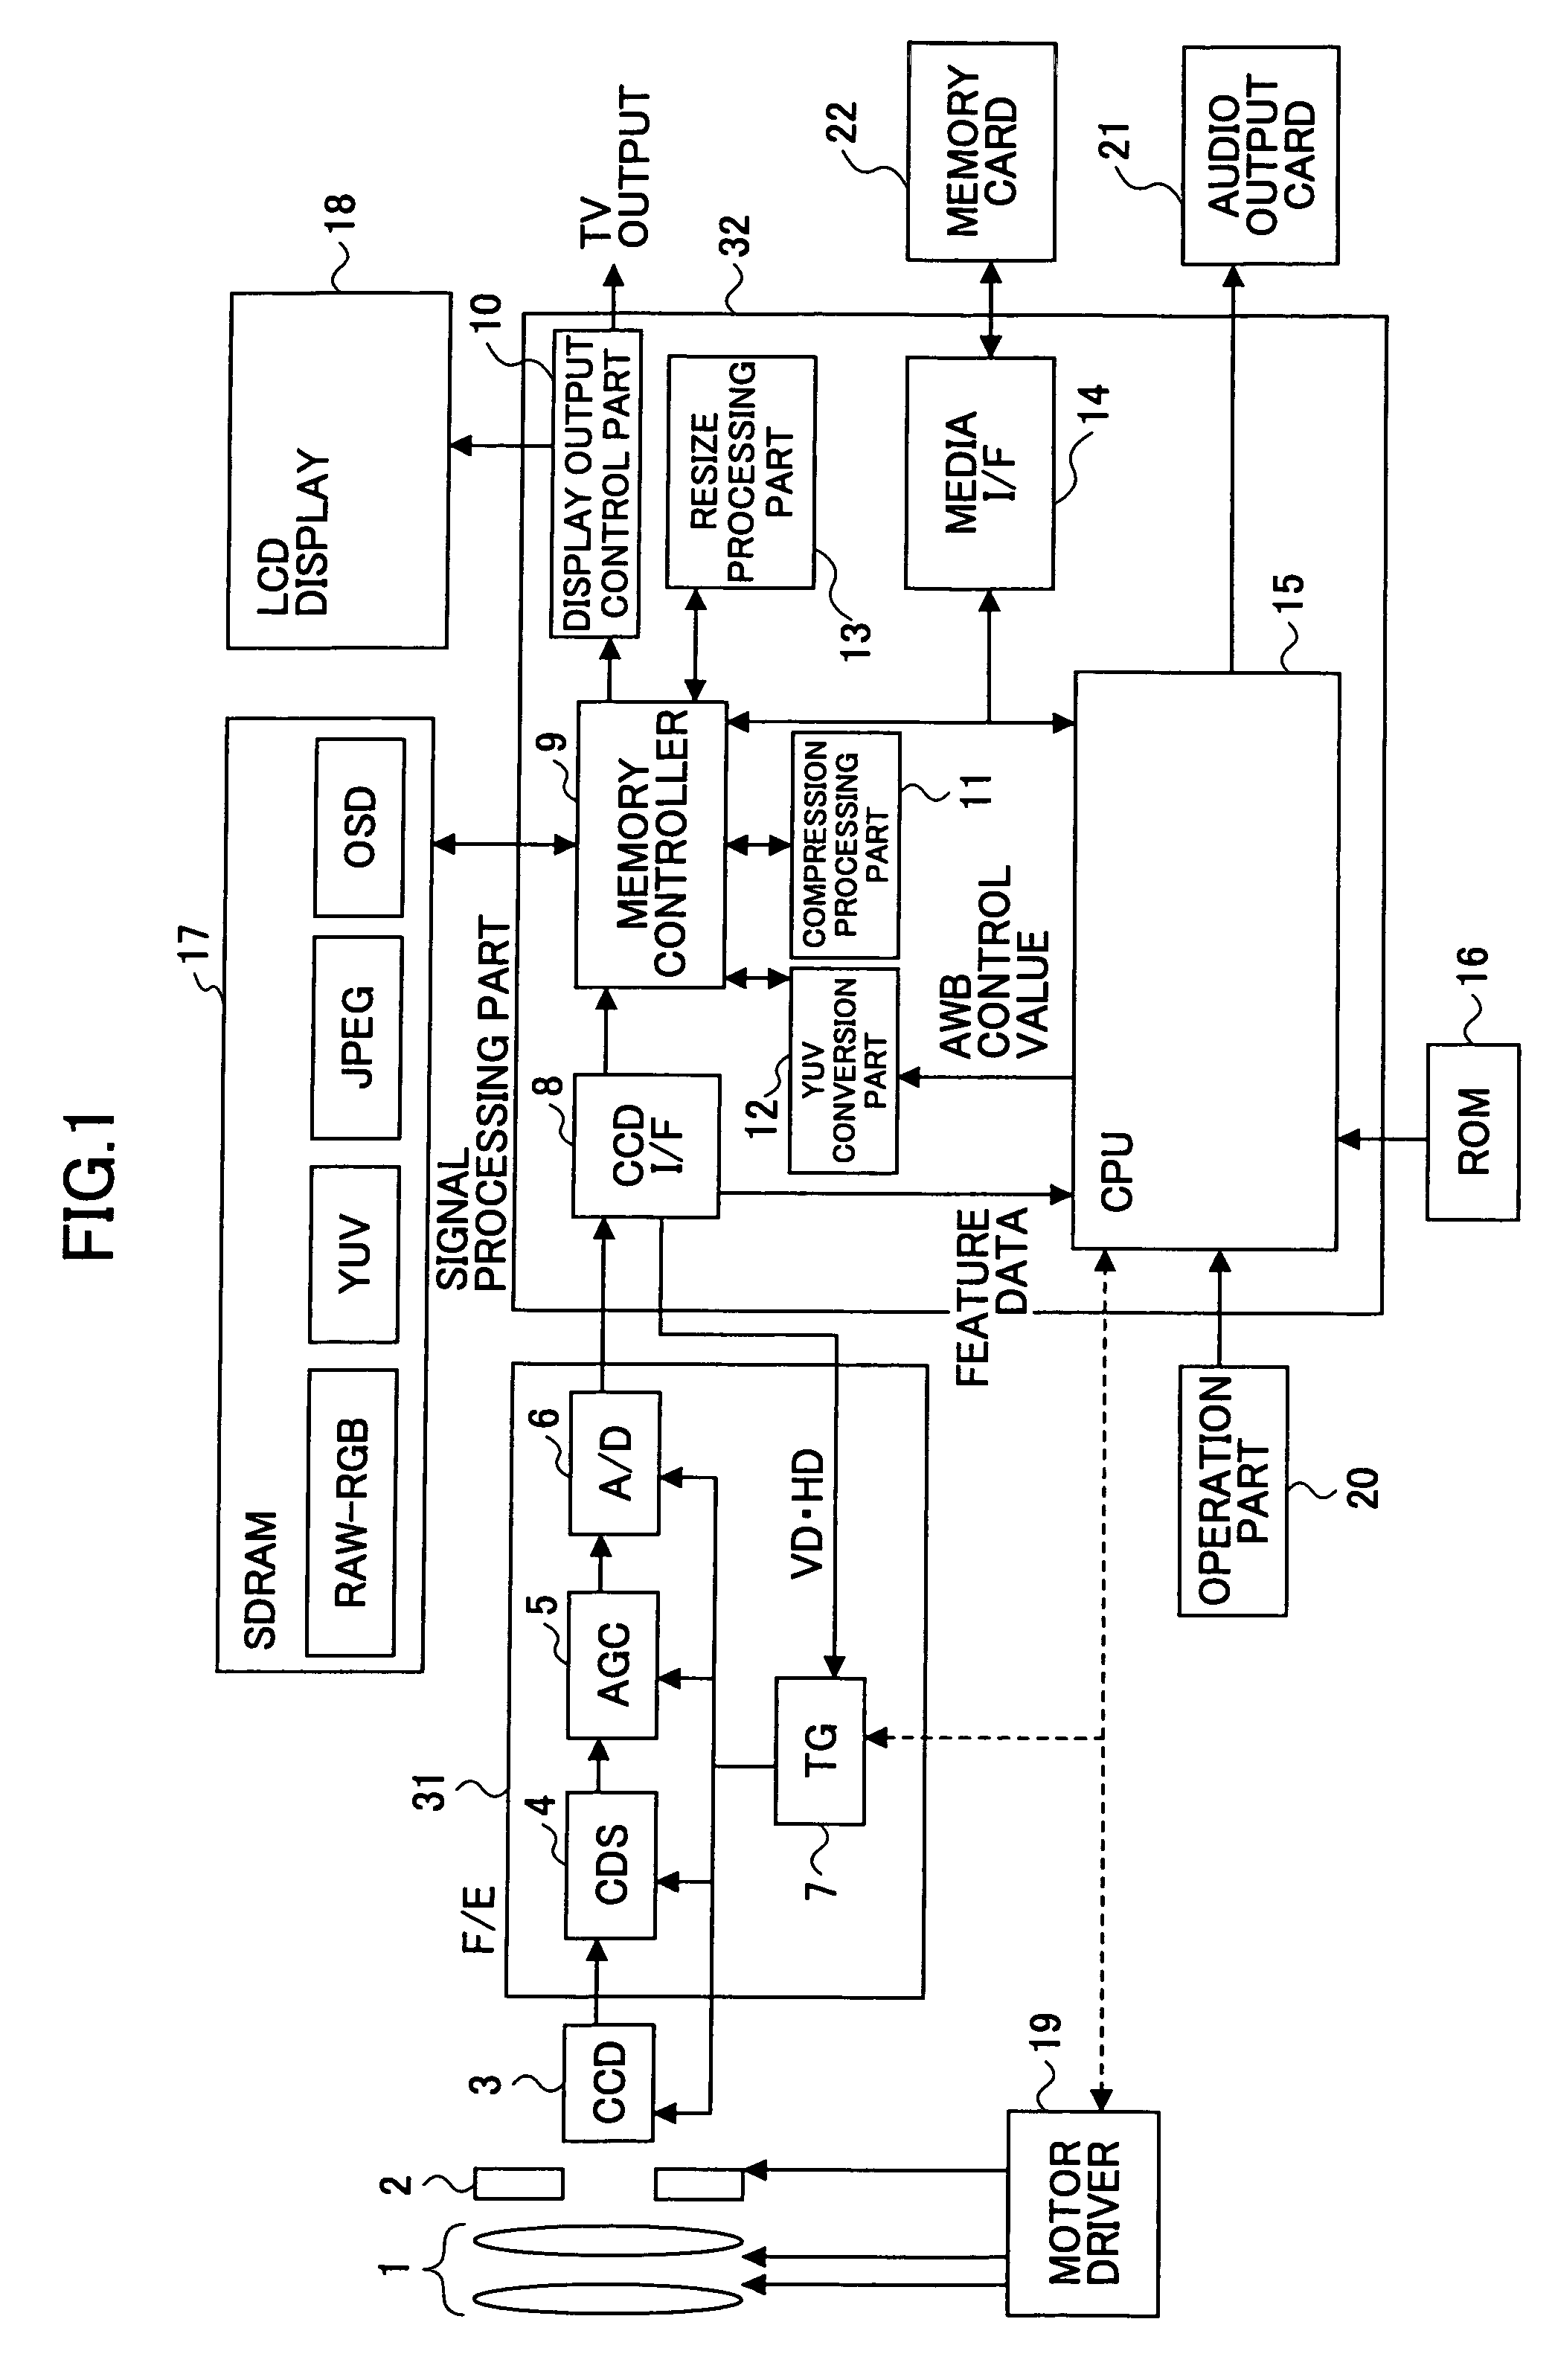 Imaging apparatus, a focusing method, a focus control method and a recording medium storing a program for executing such a method